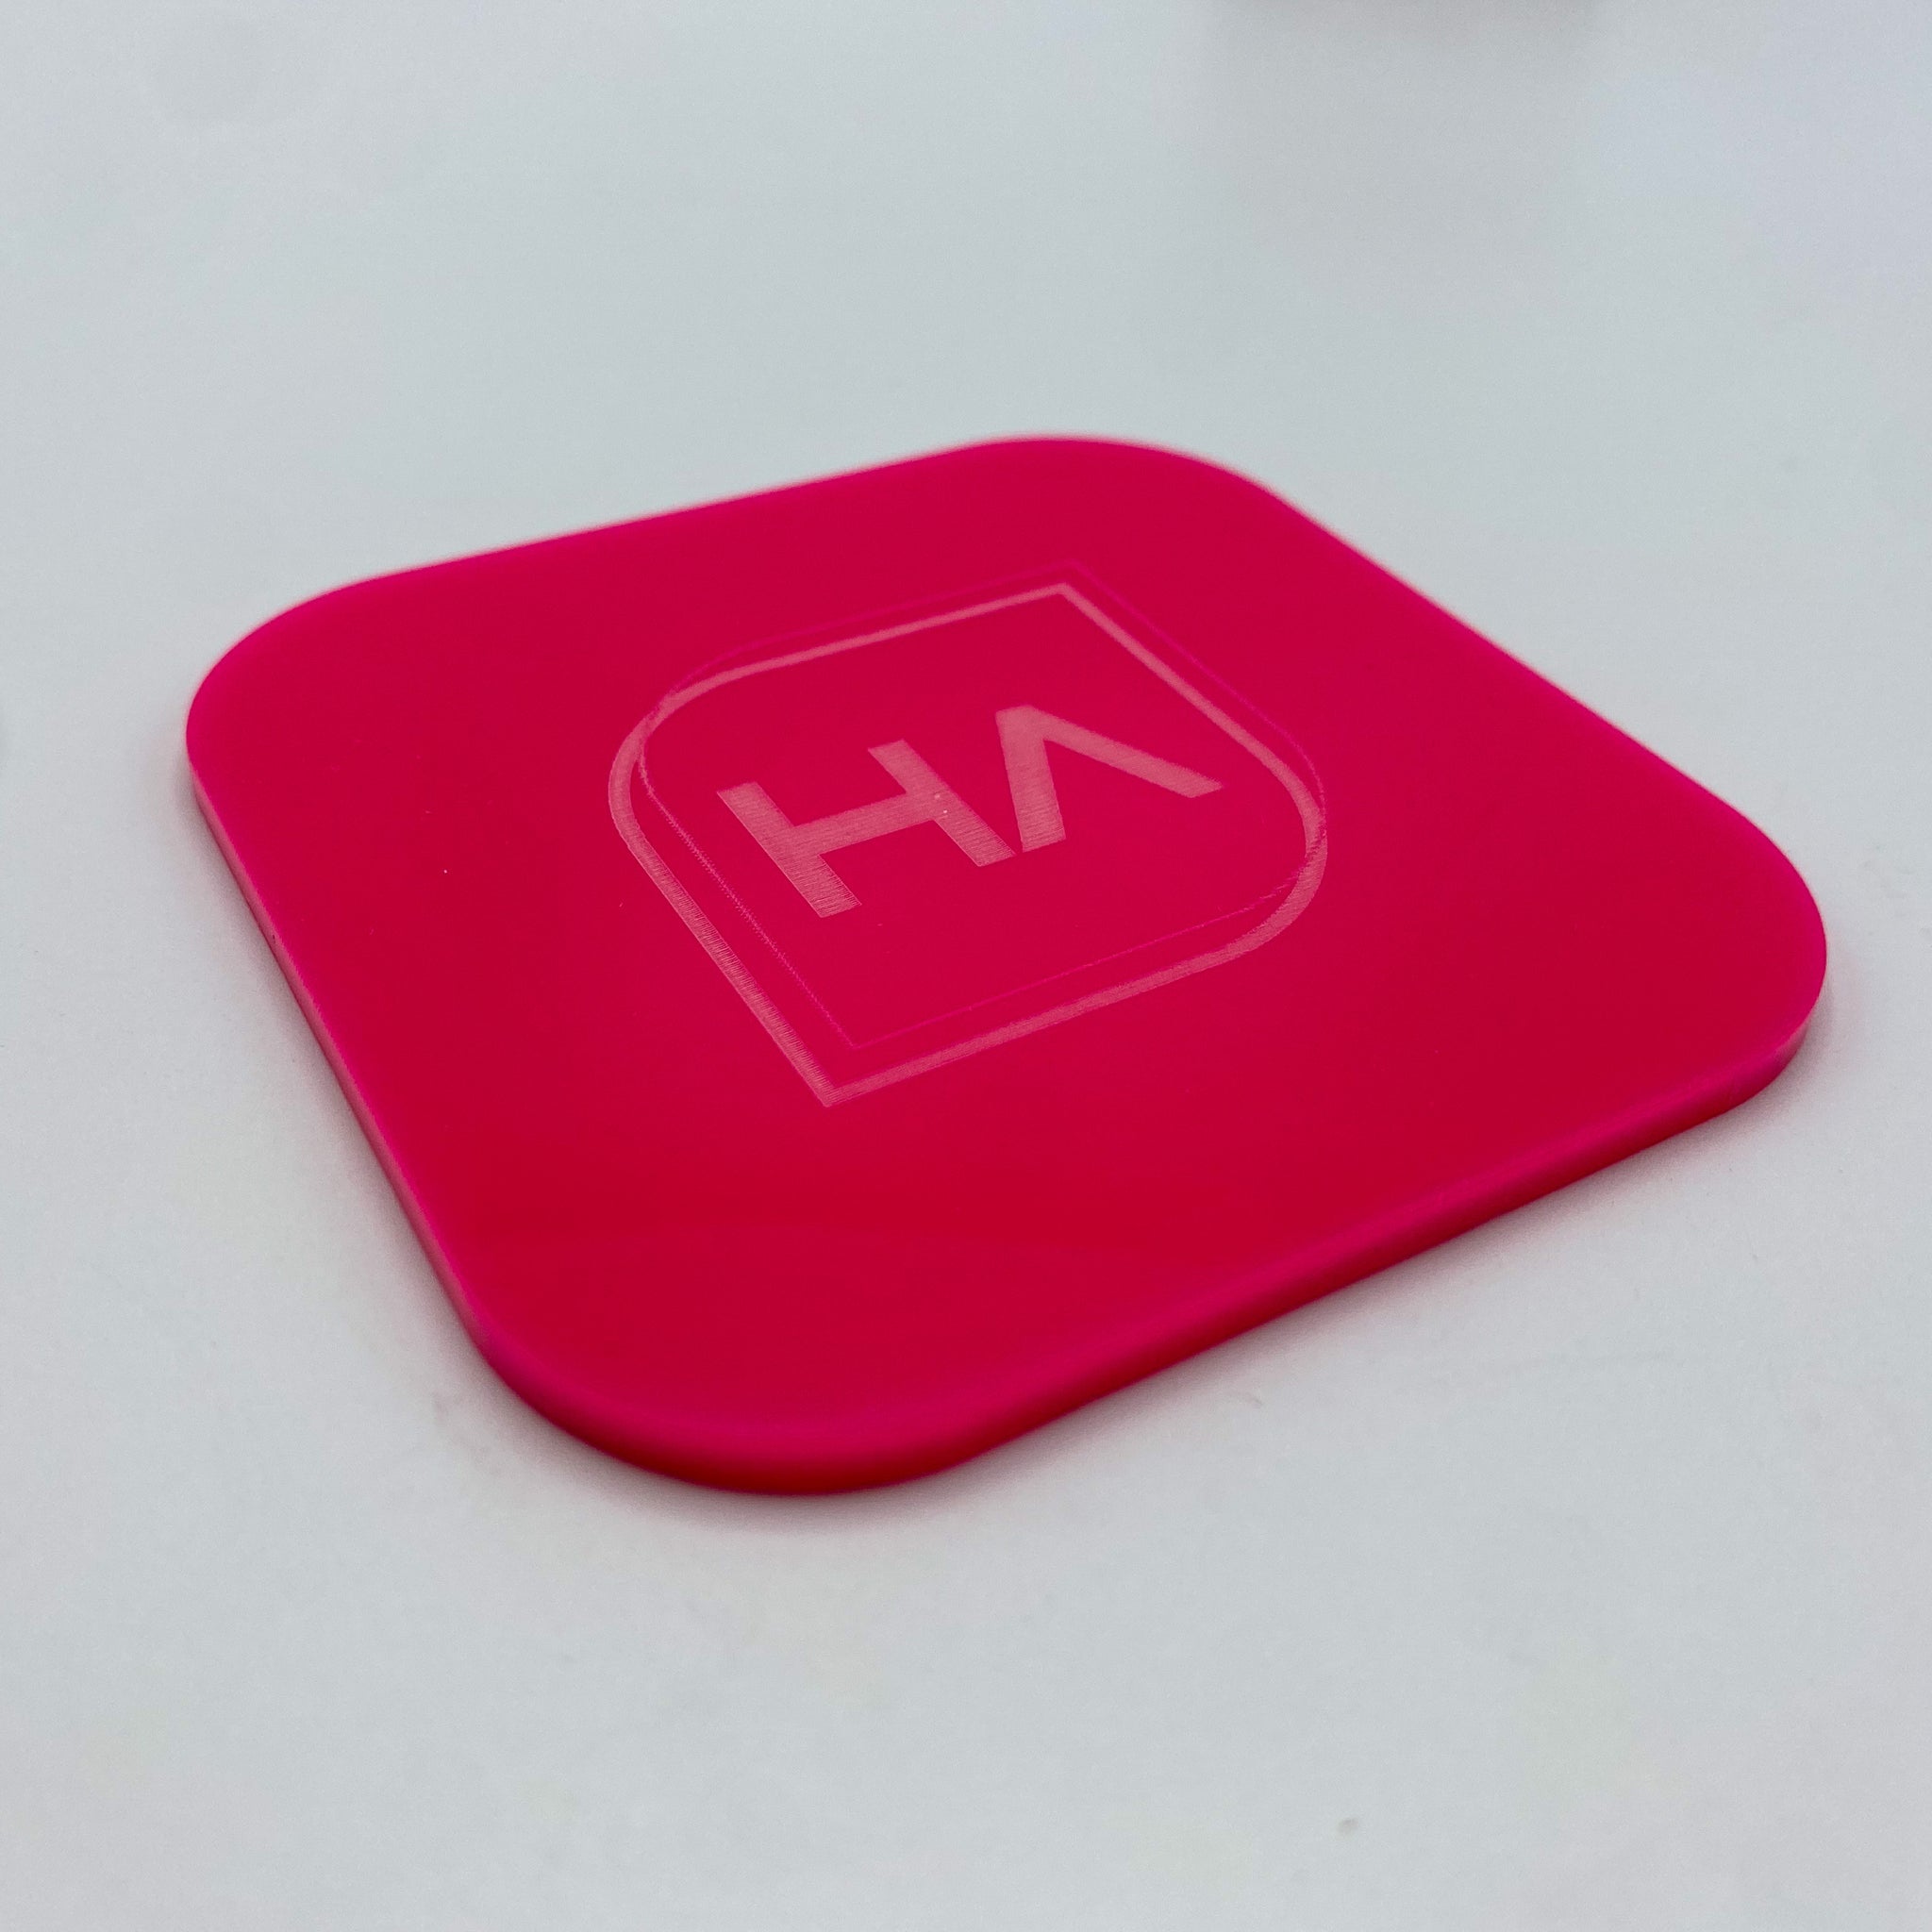 Neon Pink Acrylic for Laser Cutting and Engraving - Matte One Side